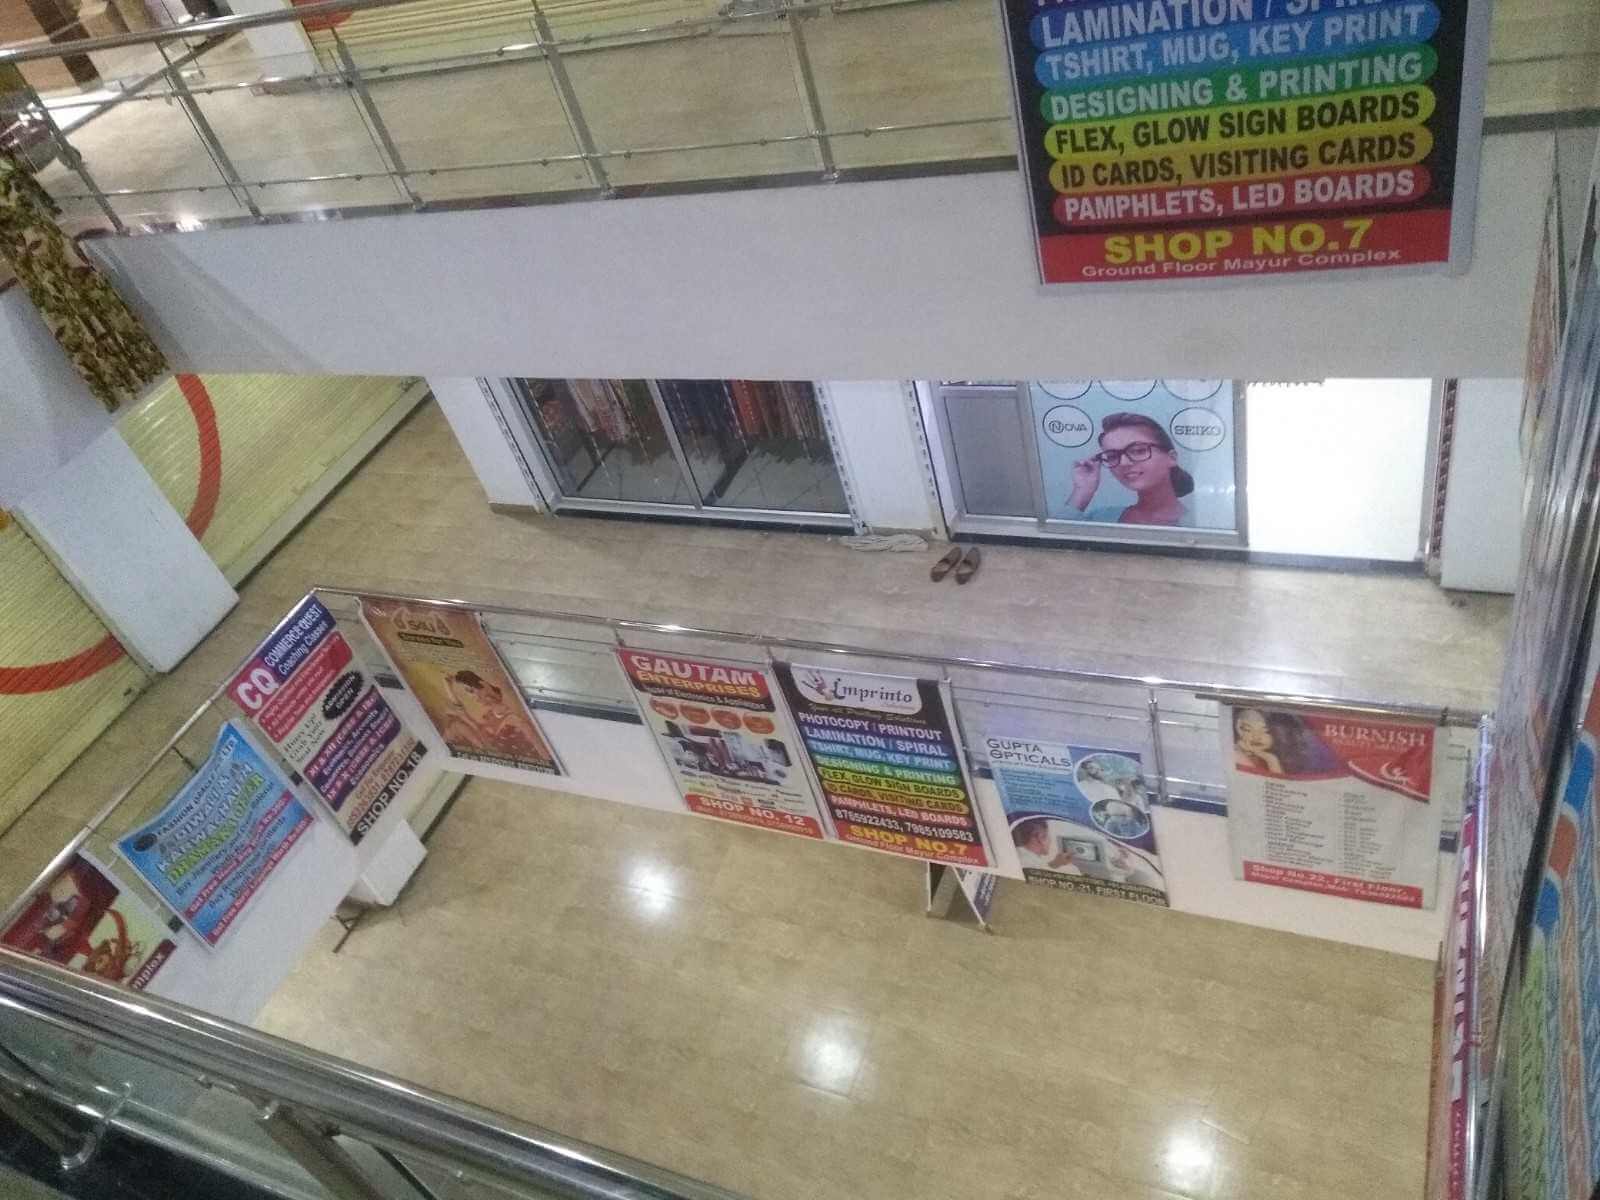 Shop for Rent 380 Sq. Feet at Lucknow
, Lucknow